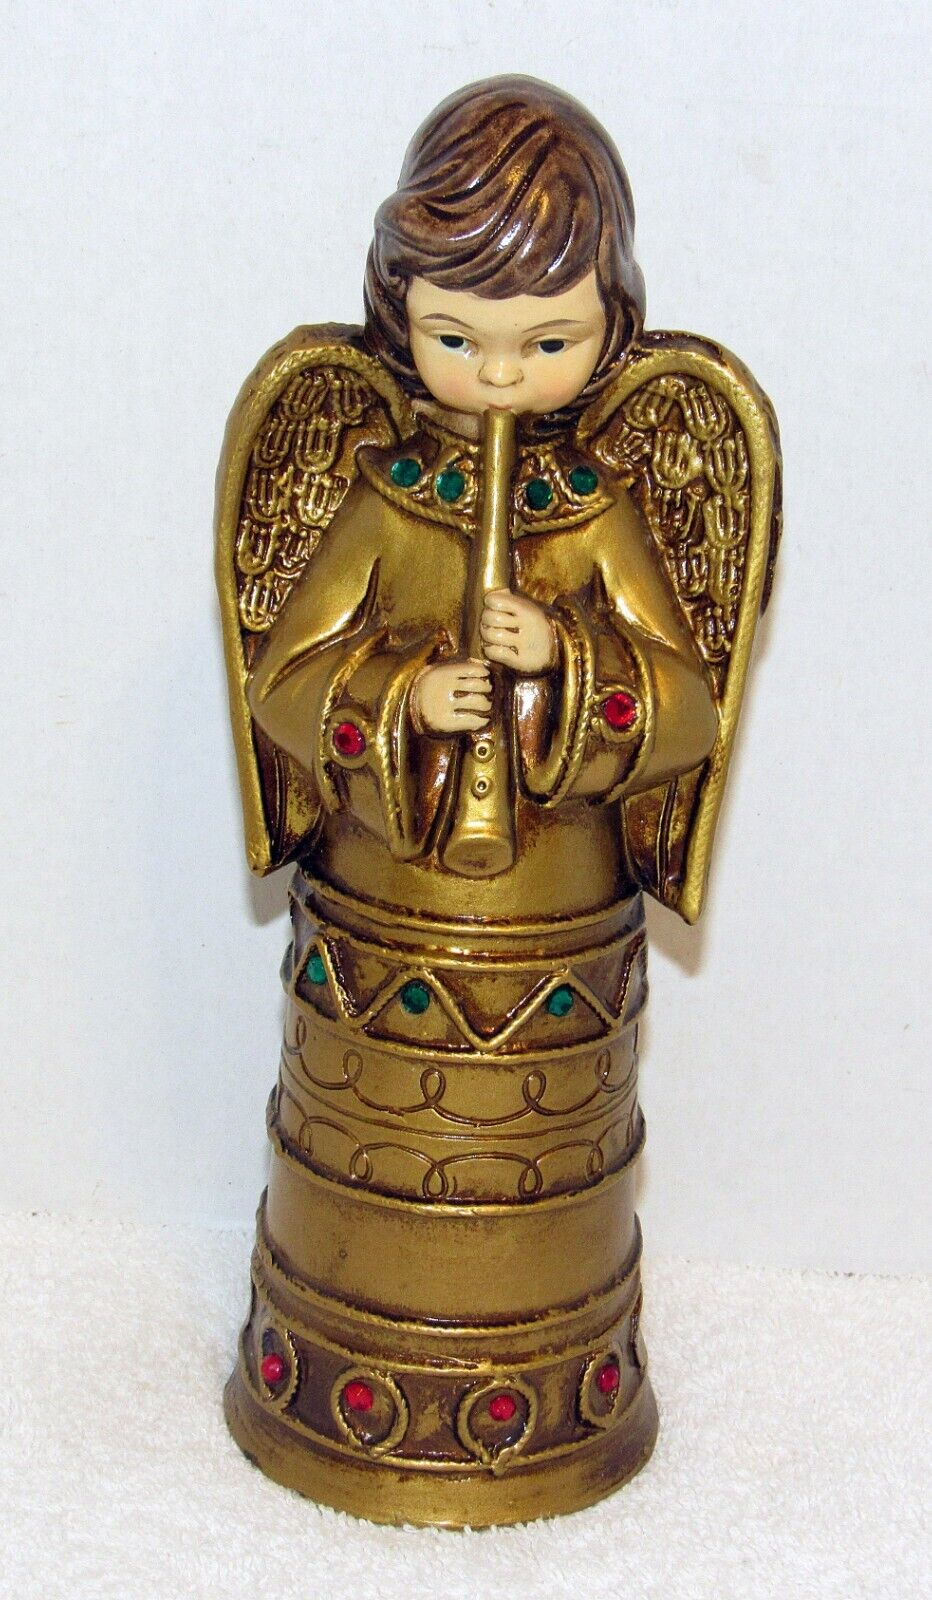 Vtg Fine A Quality Ceramic Angel Playing Horn W/ Red & Turquoise Rhine Stones